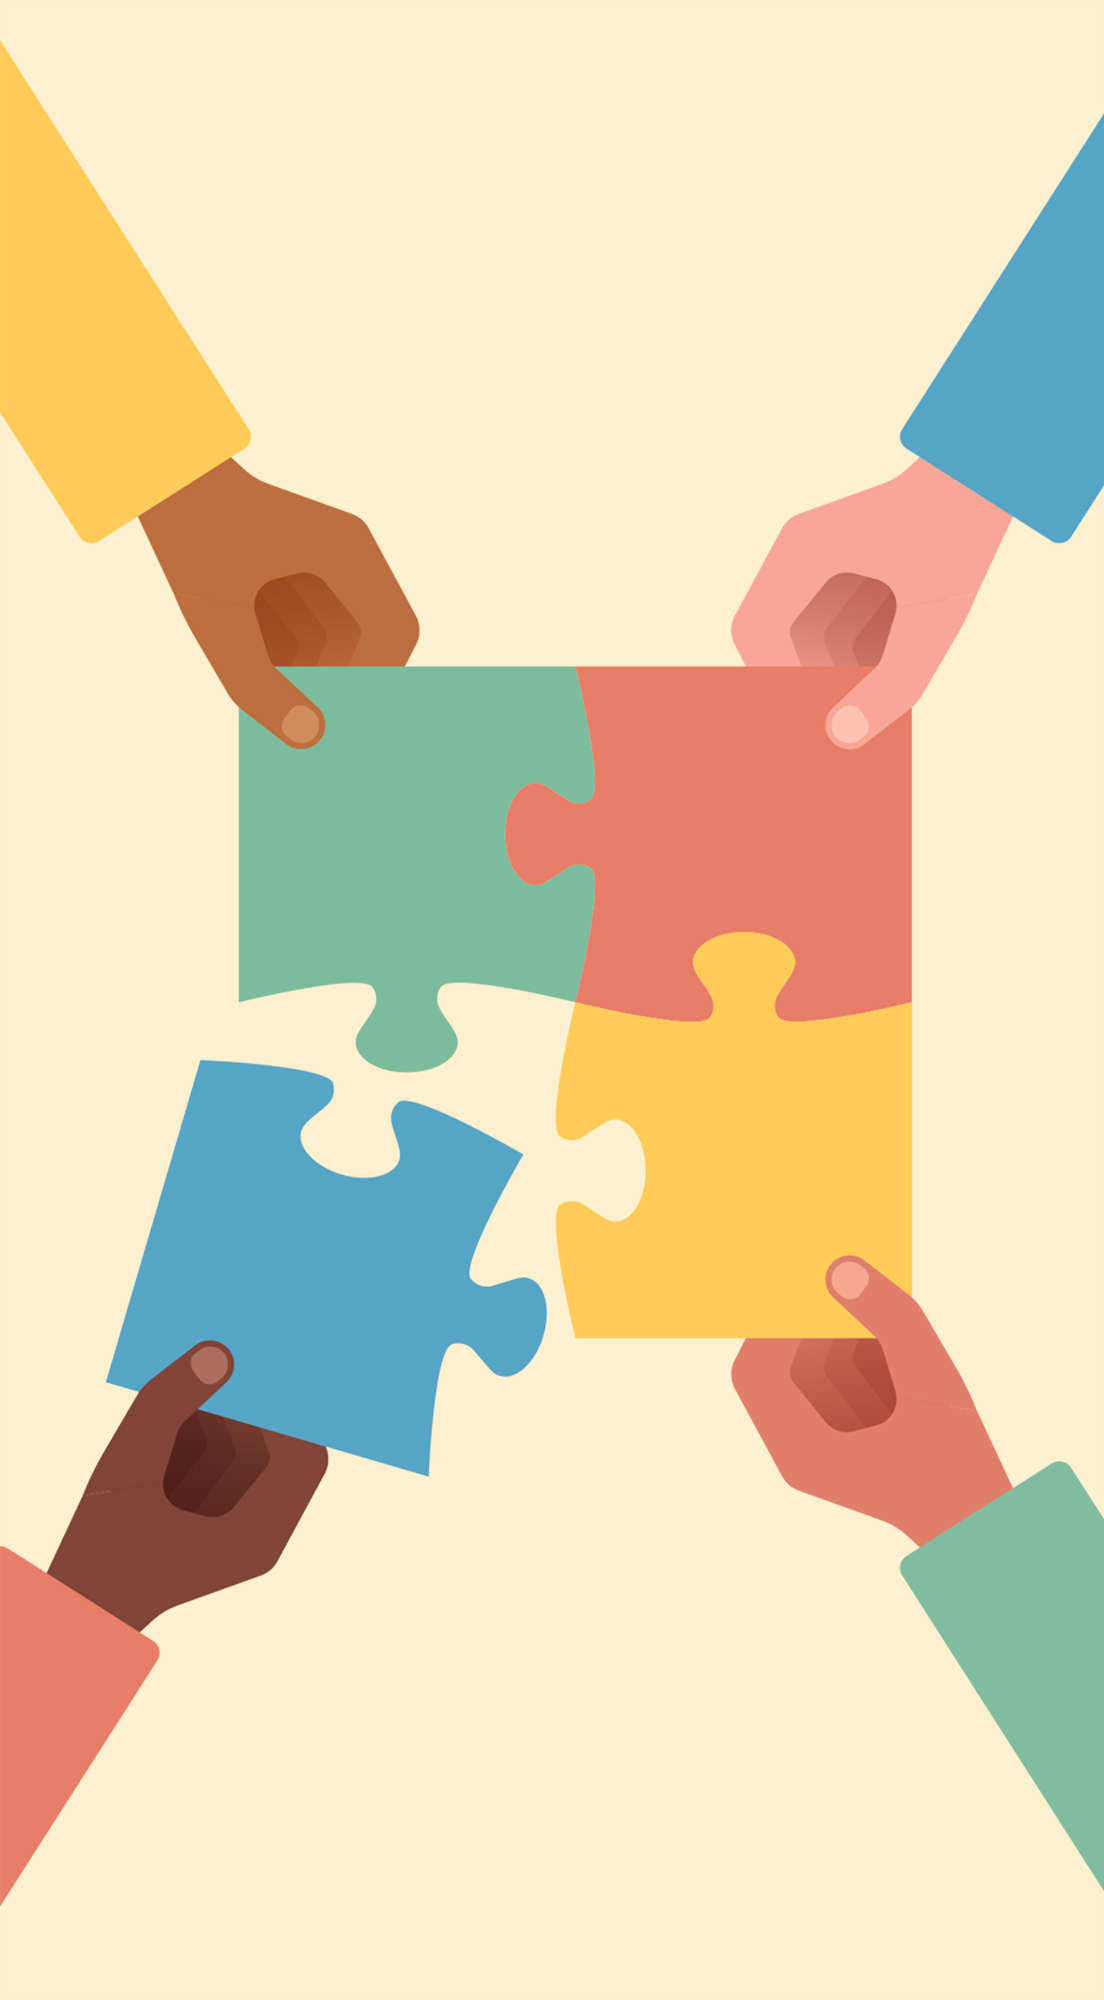 digital illustration of the top view of four different colored hands holding different colored puzzle pieces together